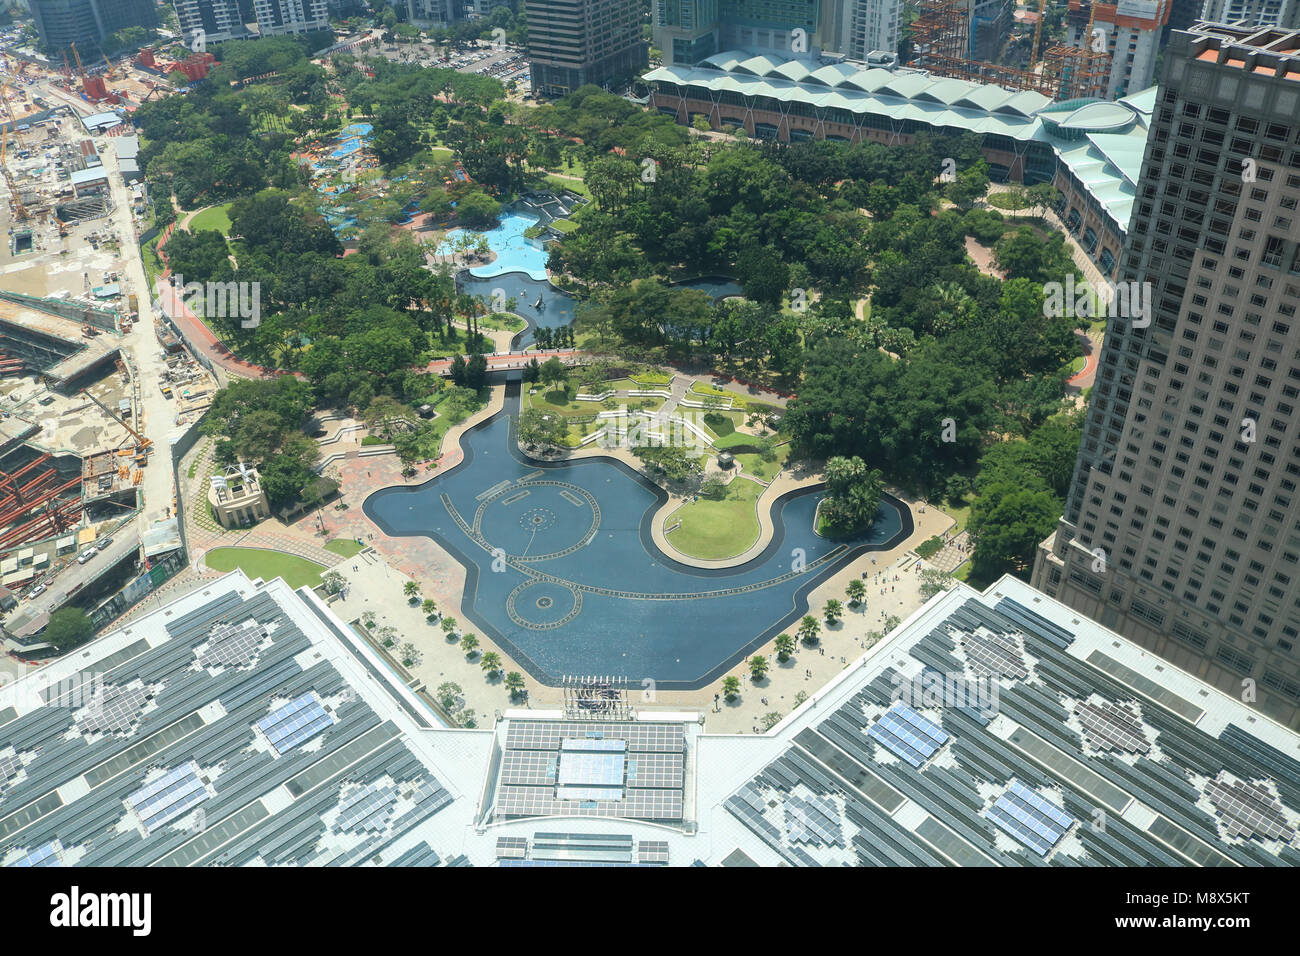 Kuala Lumpur Malaysia. 21st March 2018.  Quality of Living in Kuala Lumpur has dropped according to expatriates which is  based on a new survey about the world’s most livable cities conducted by the British consulting firm ECA International, which placed  Kuala Lumpur in 126th place, down from 25th Credit: amer ghazzal/Alamy Live News Stock Photo